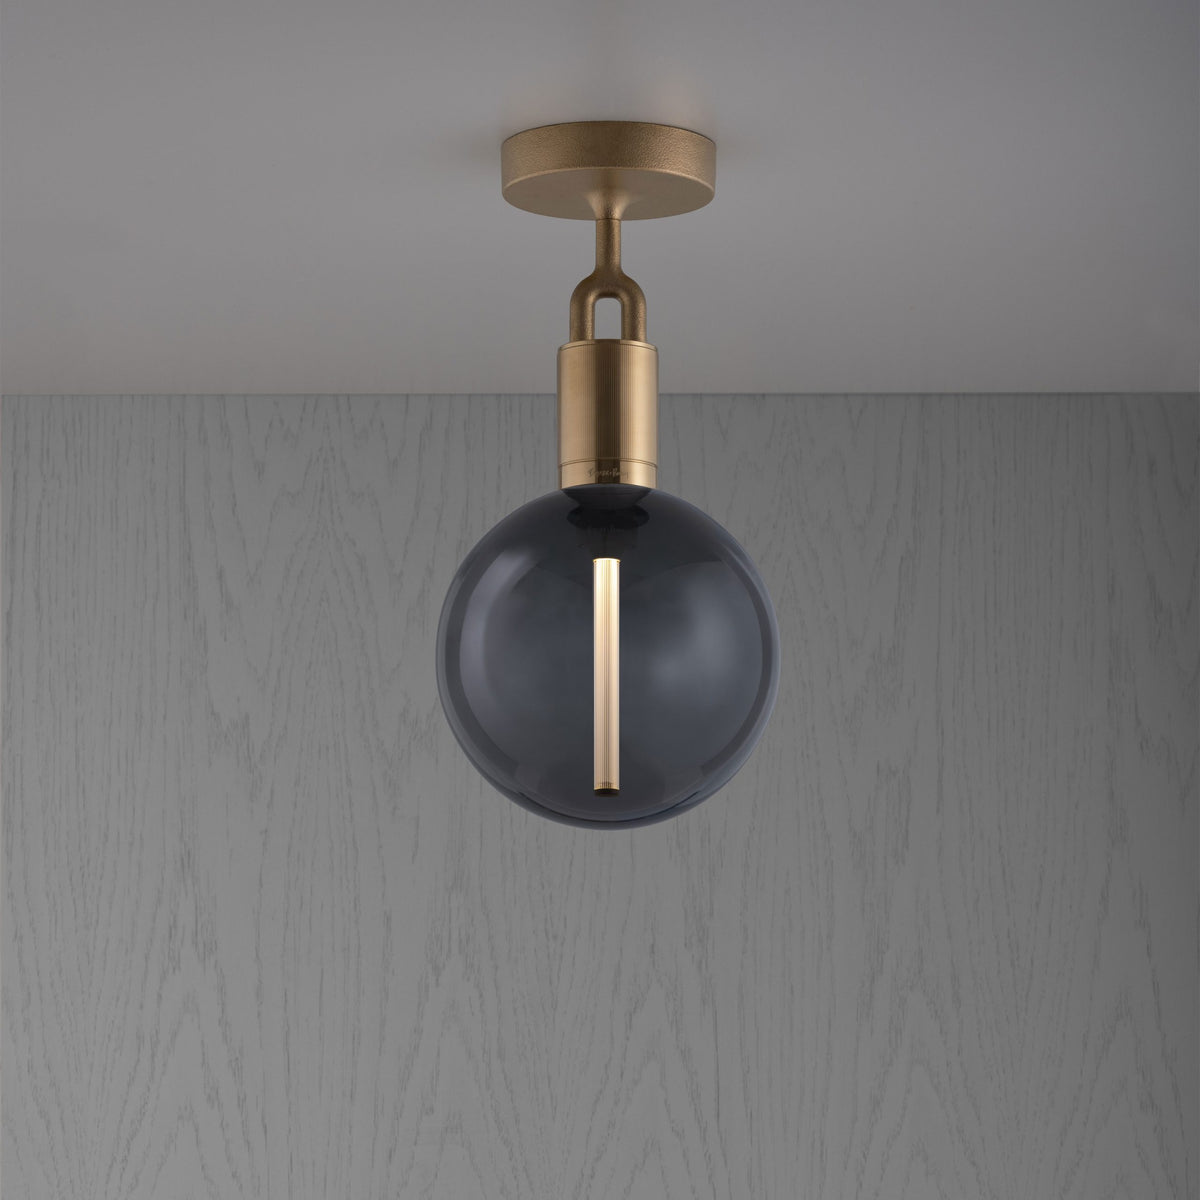 Buster + Punch - NFC-823207 - Forked Ceiling - Globe  - Forked - Brass 